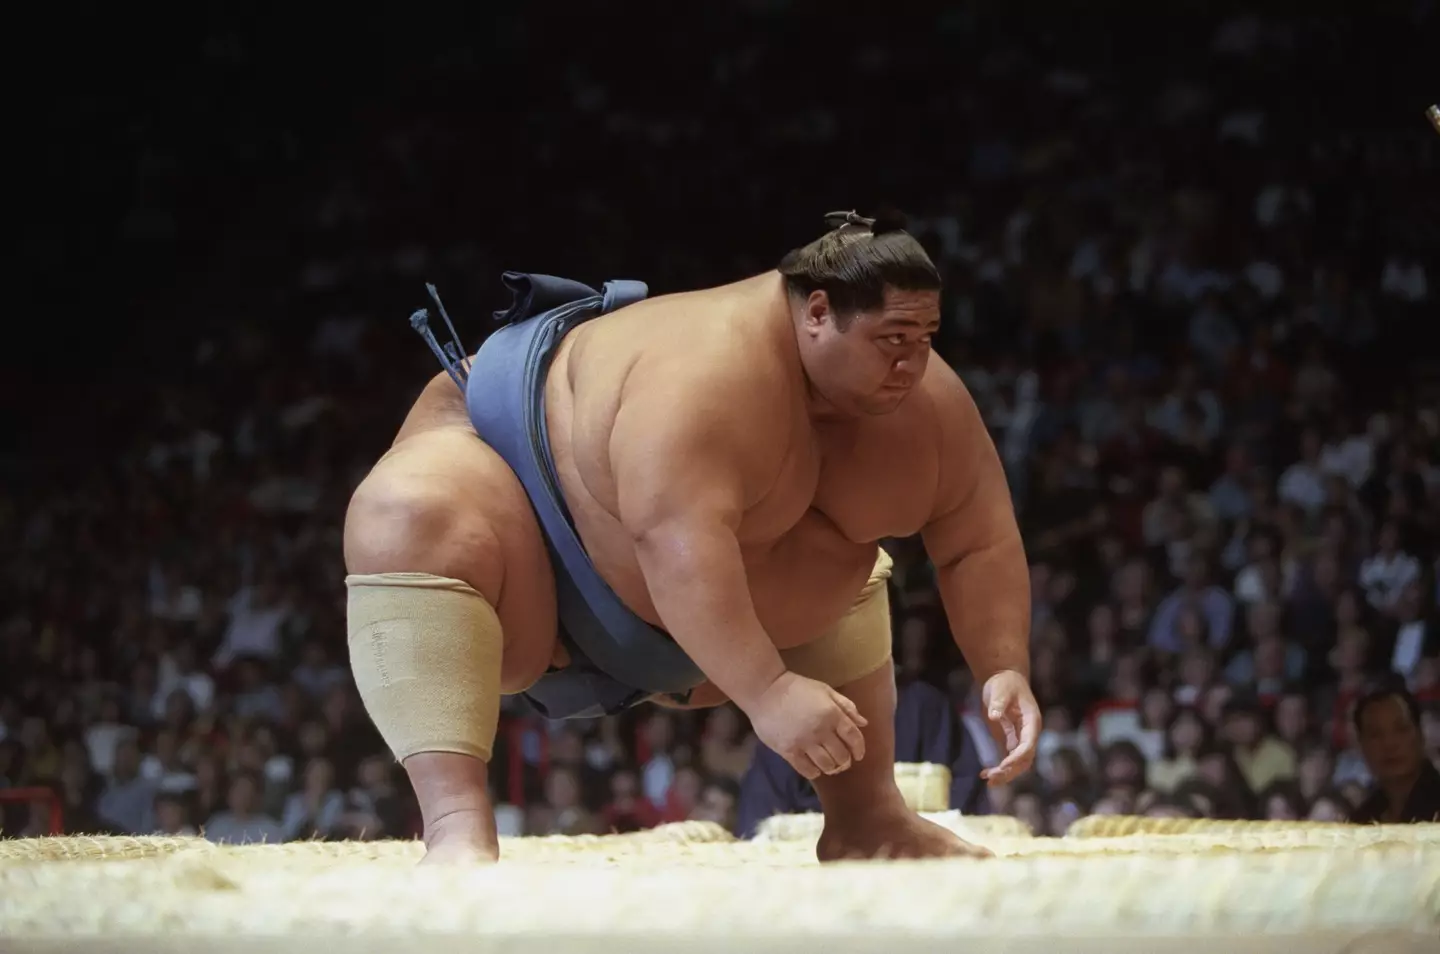 An example of a sumo wrestler in Japan.